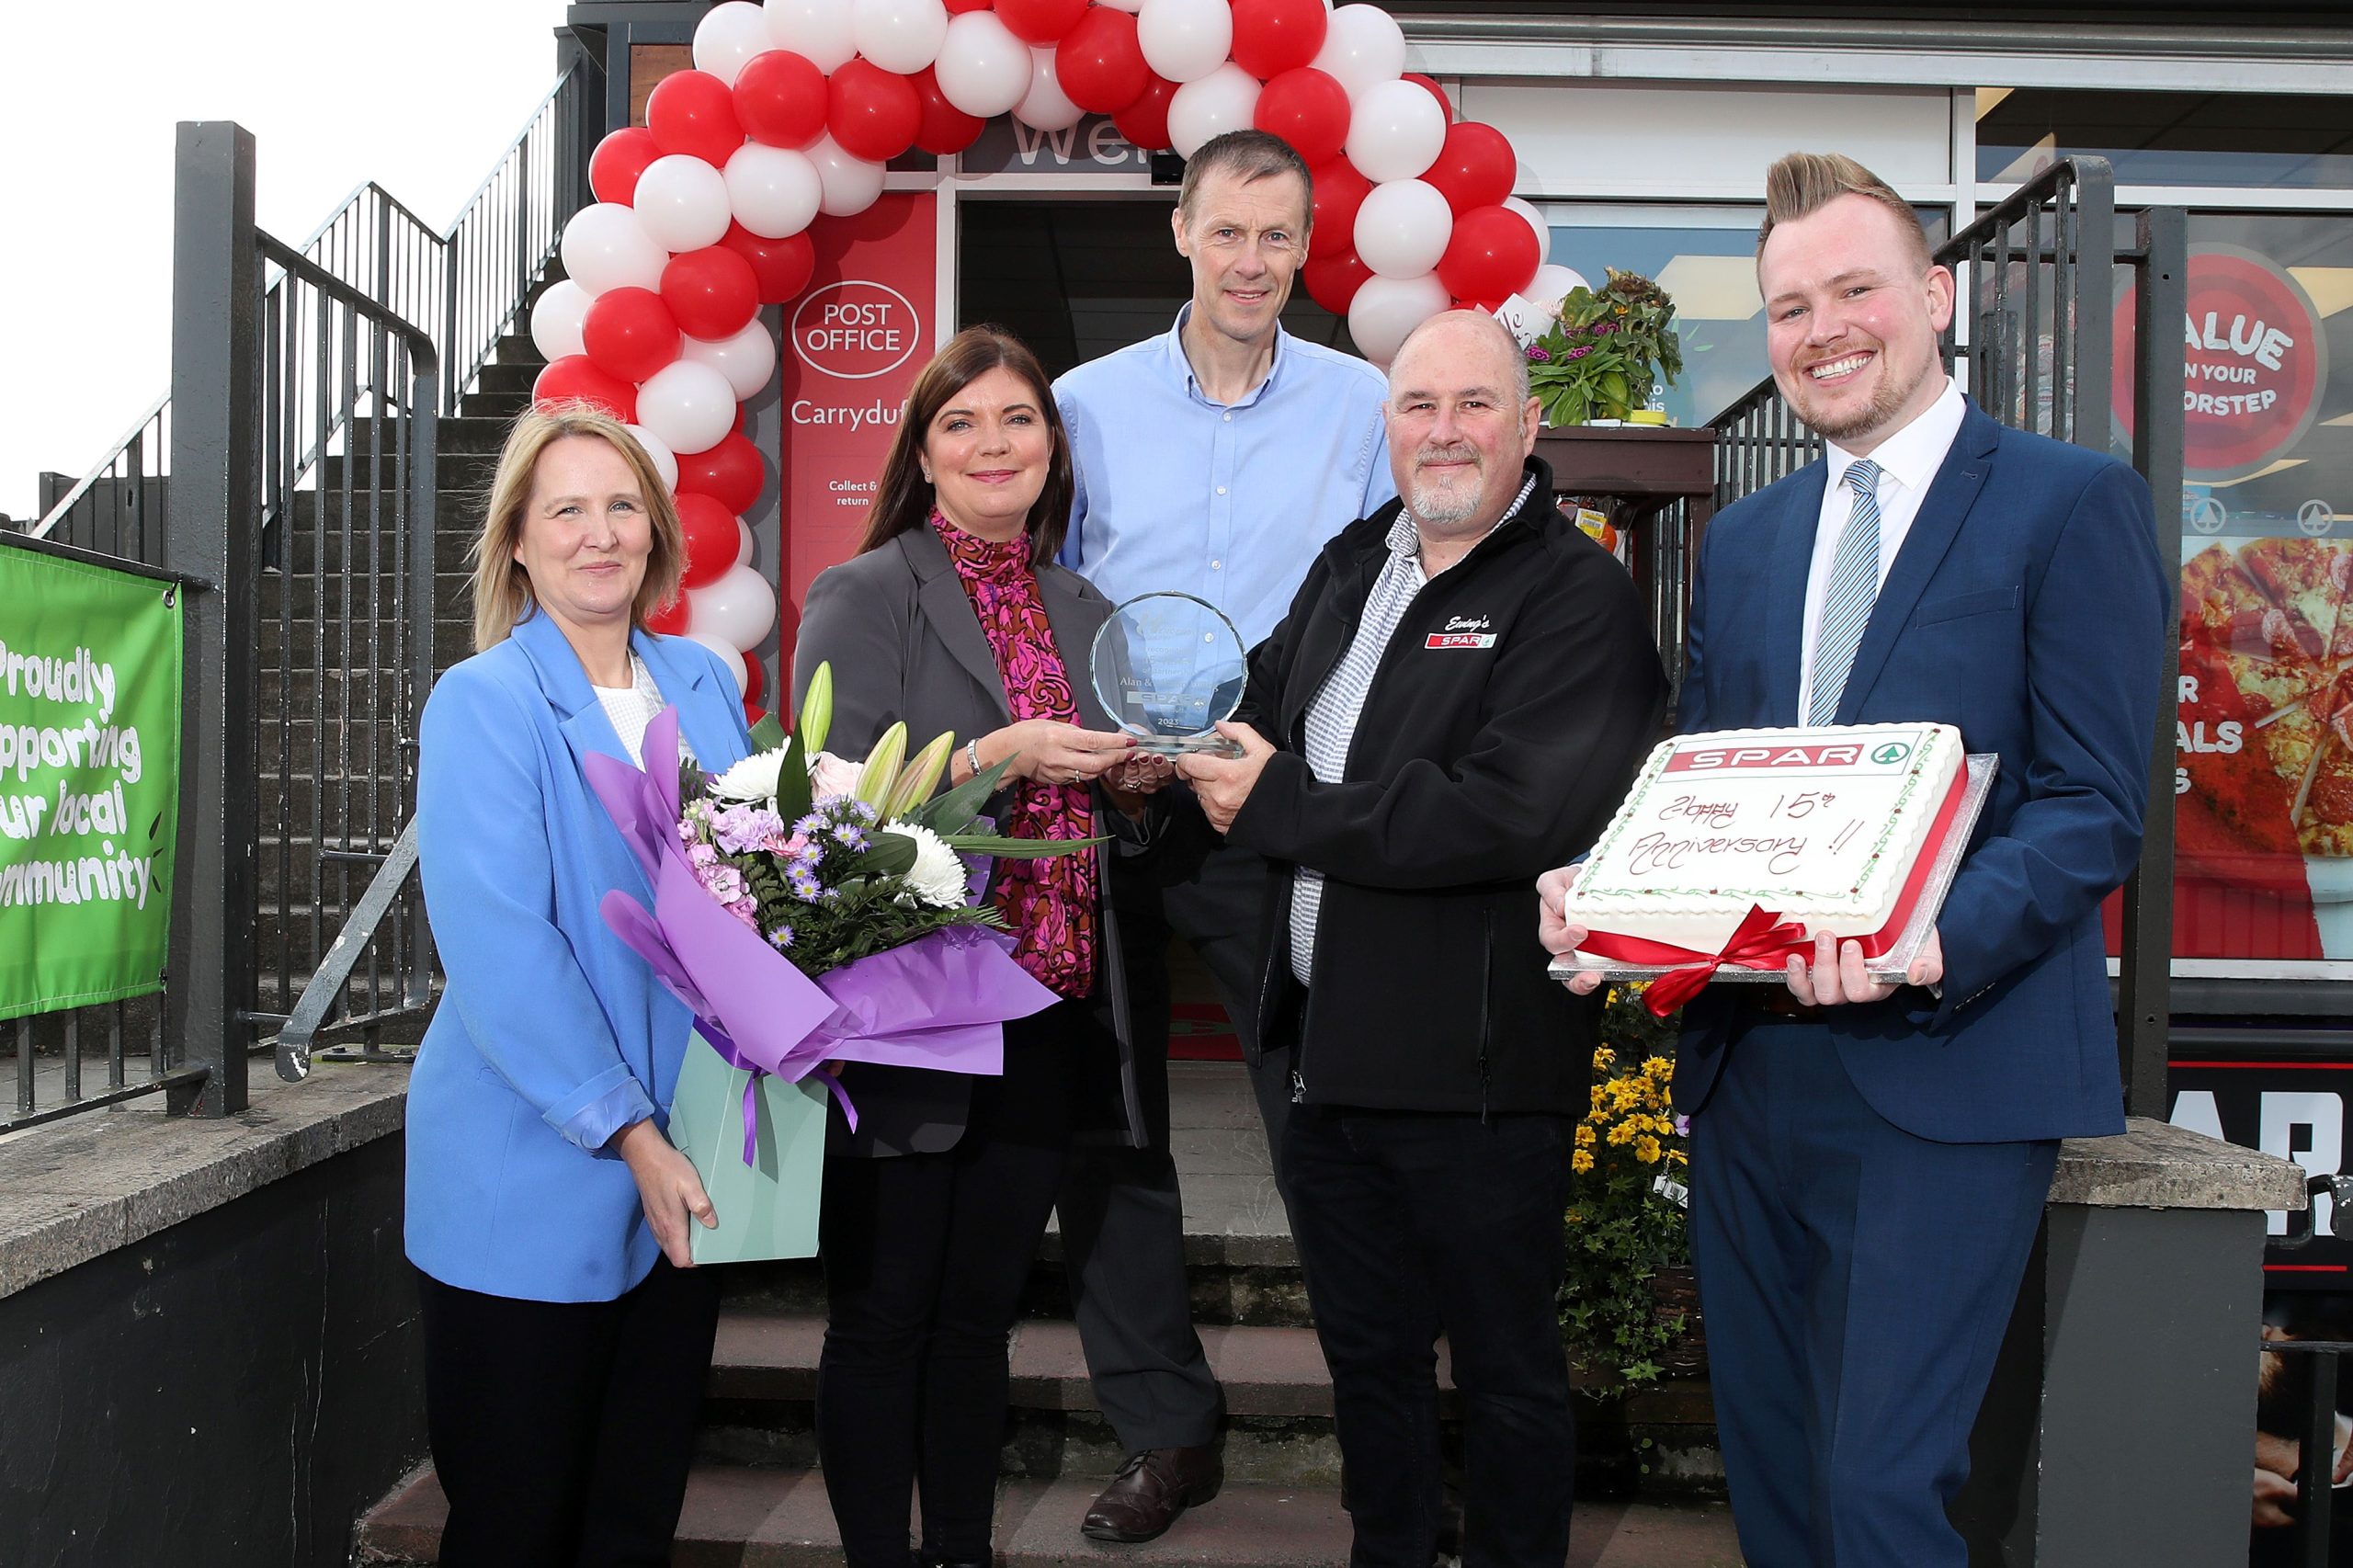 Community store celebrates 15 years in business with further expansion for local shoppers